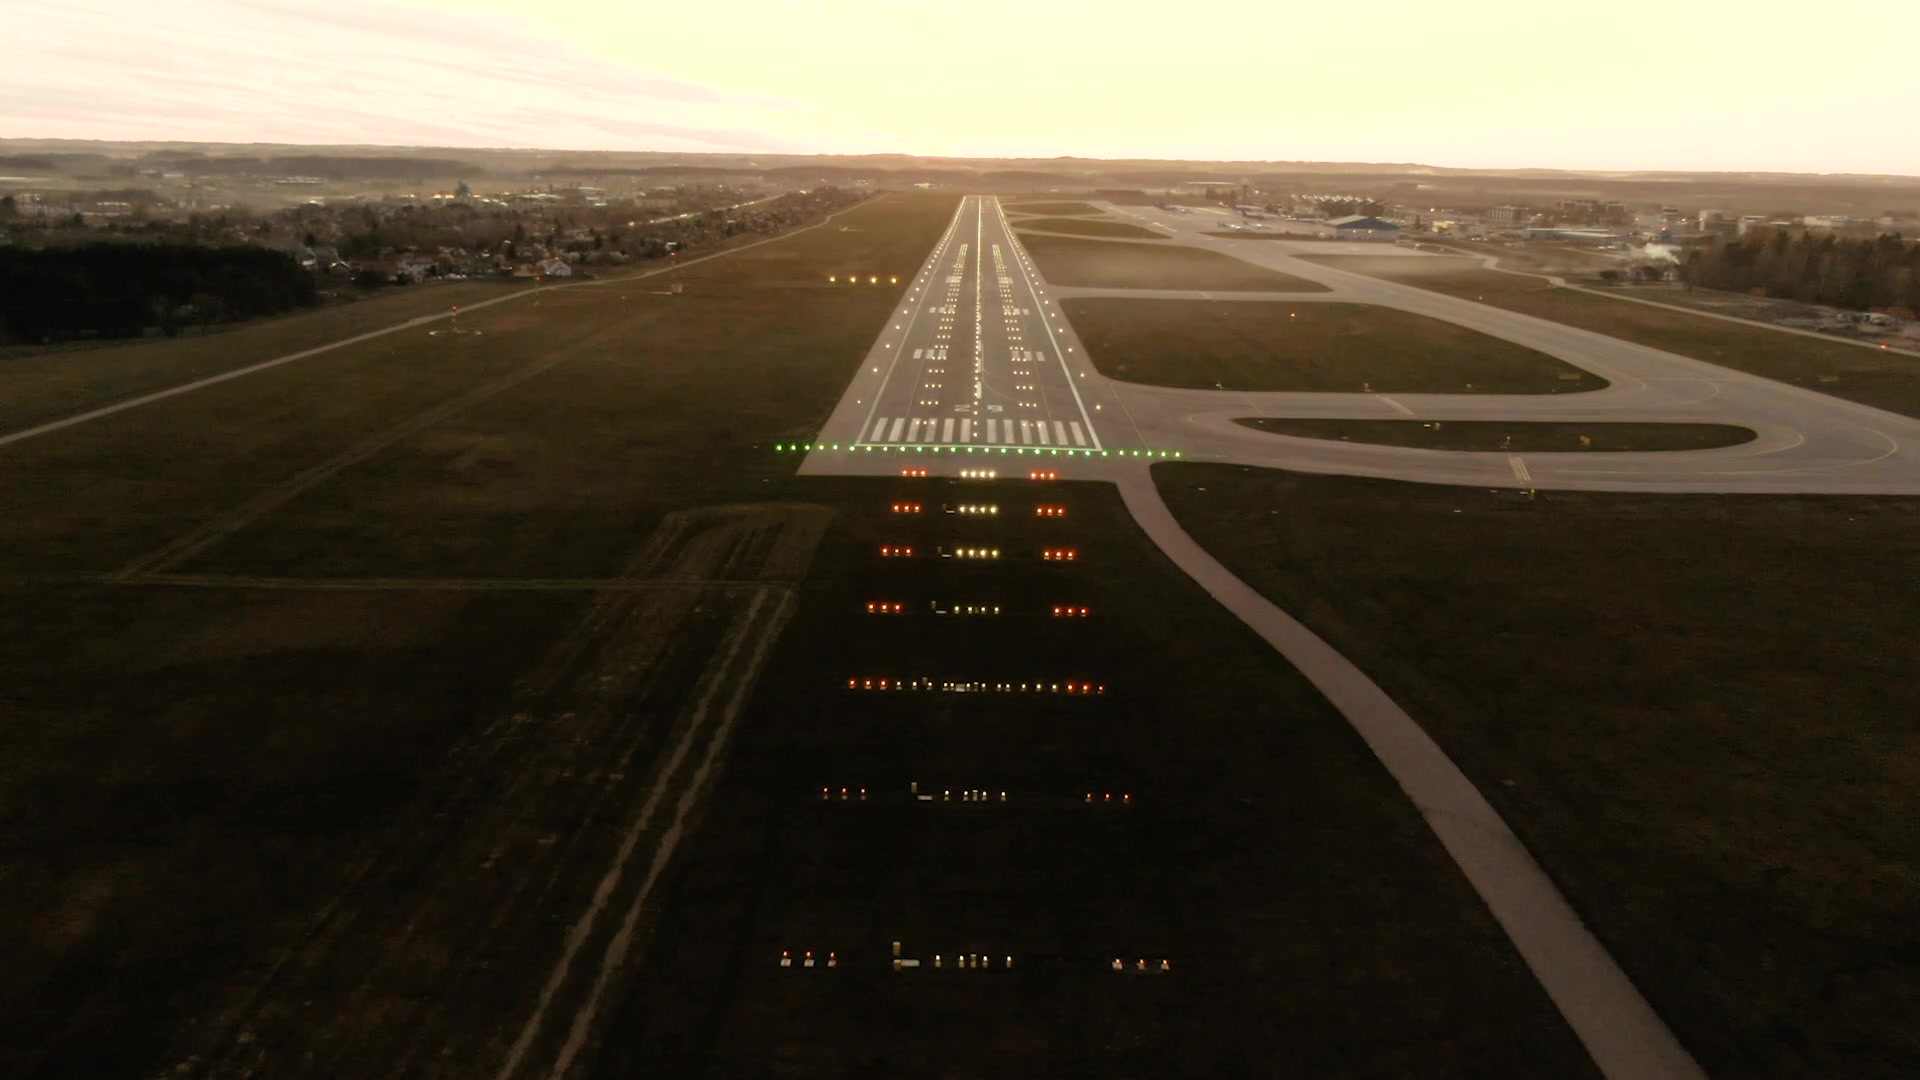 Runway Approach Lighting Systems